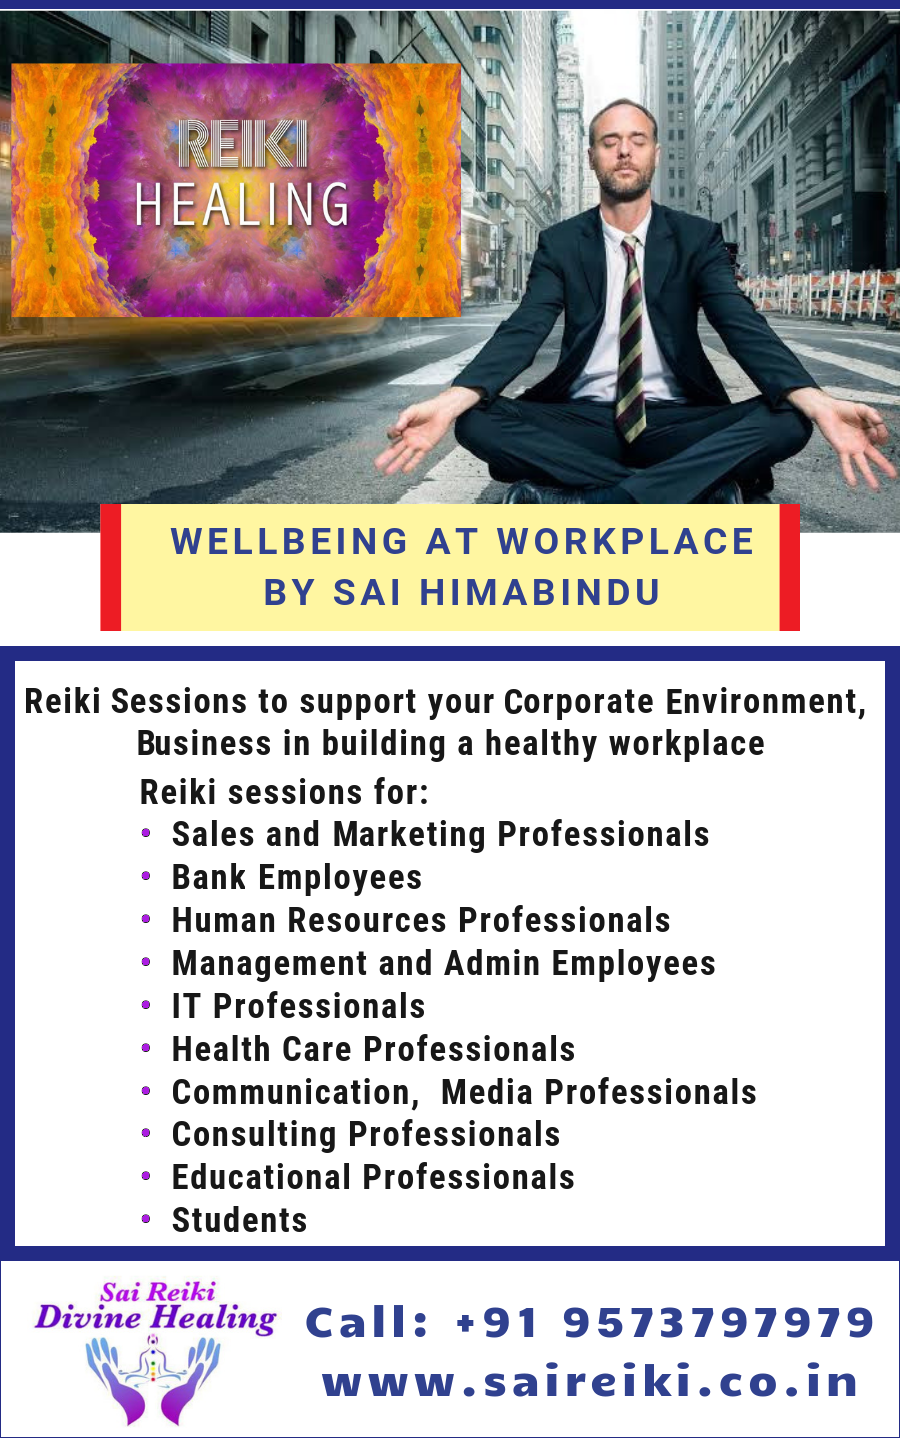 Wellbeing and Stress Management at workplace by Sai Hima Bindu - Rajkot